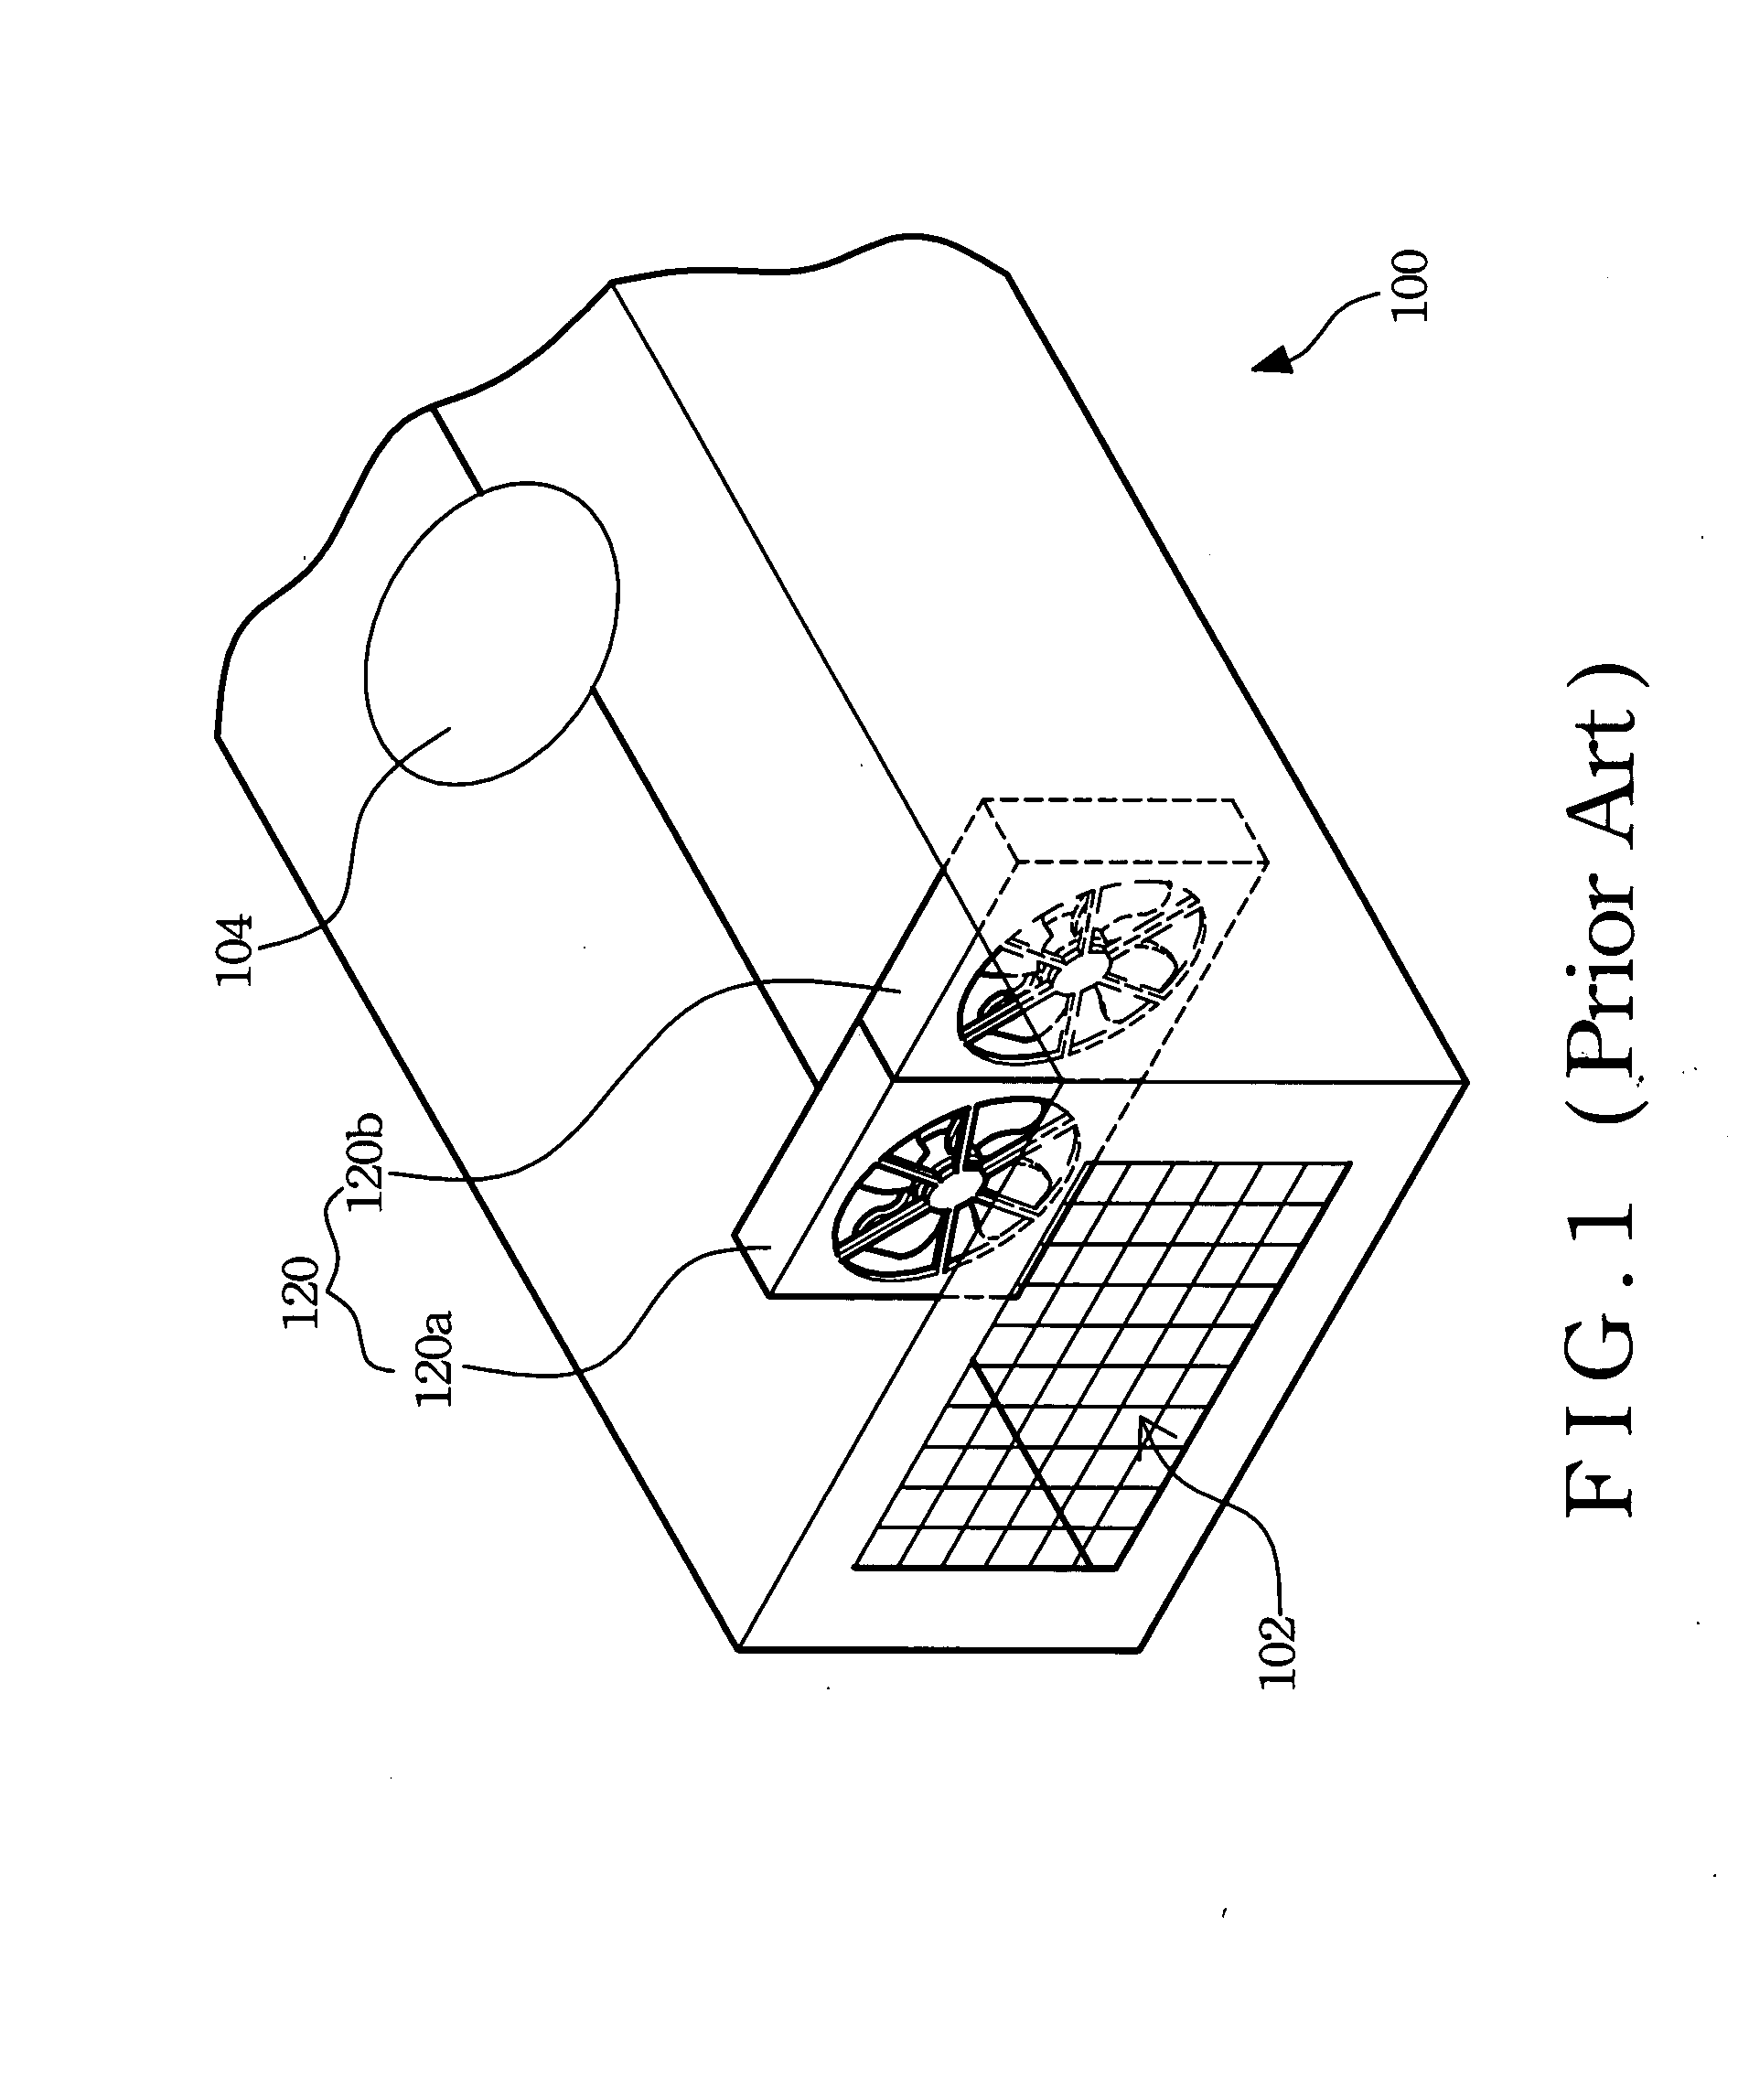 Projector with an equalizing temperature module